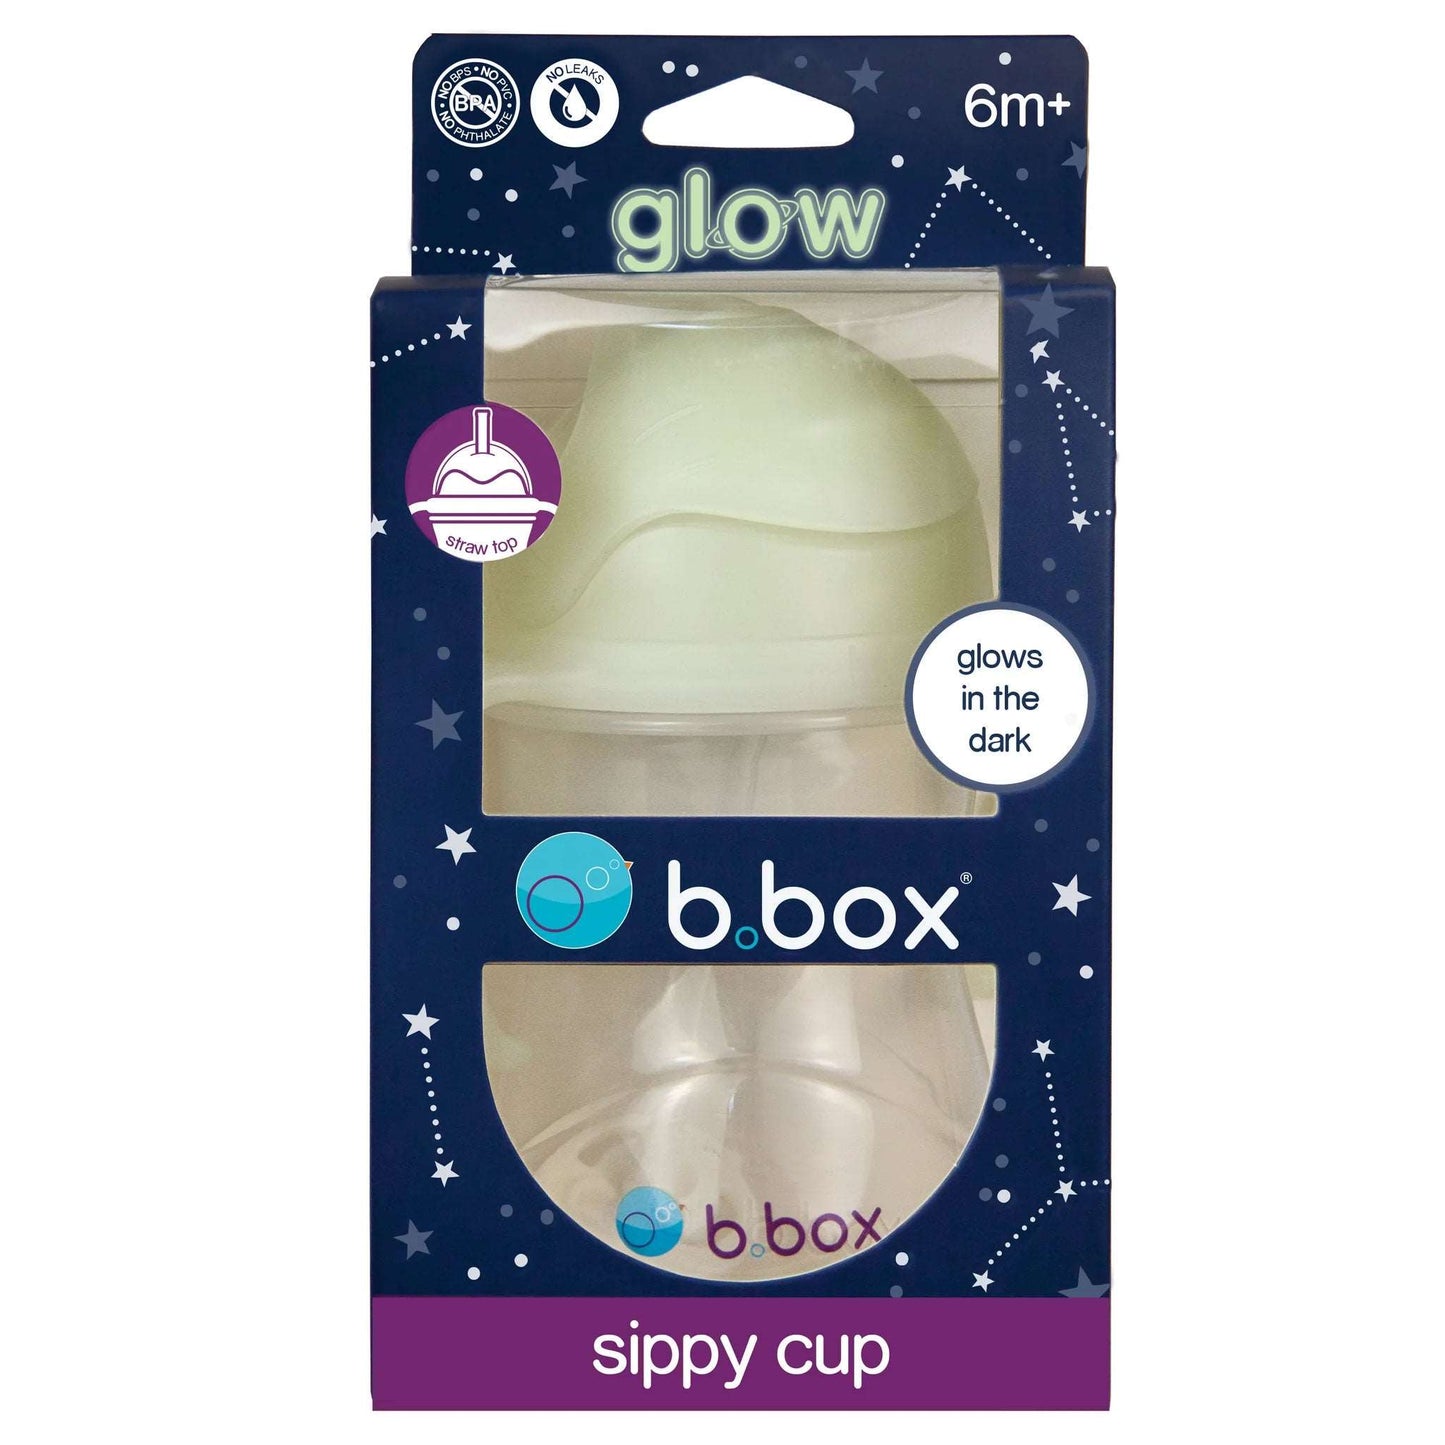 b.box Sippy Cup (Glow in the Dark)